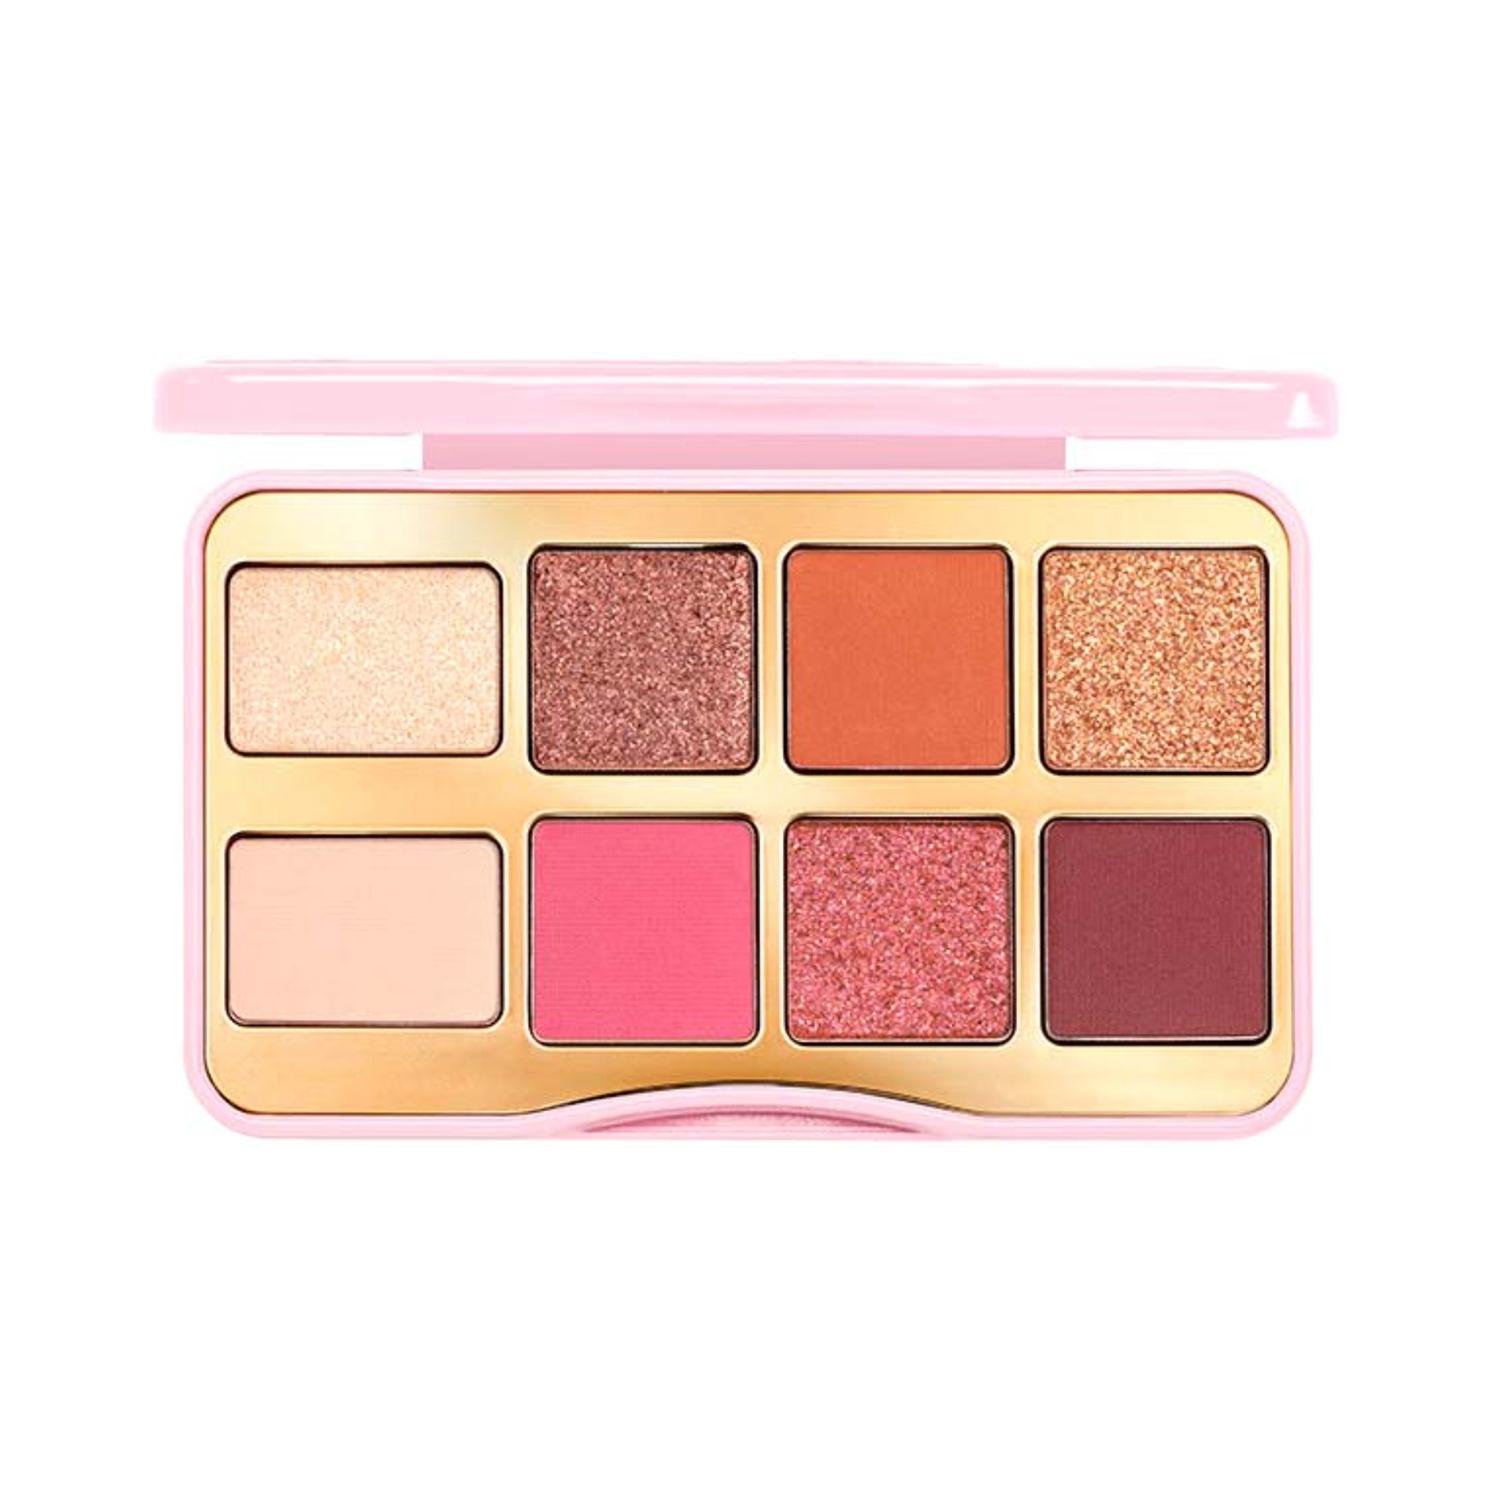 too faced let’s play eye palette - multi-color (6.7g)